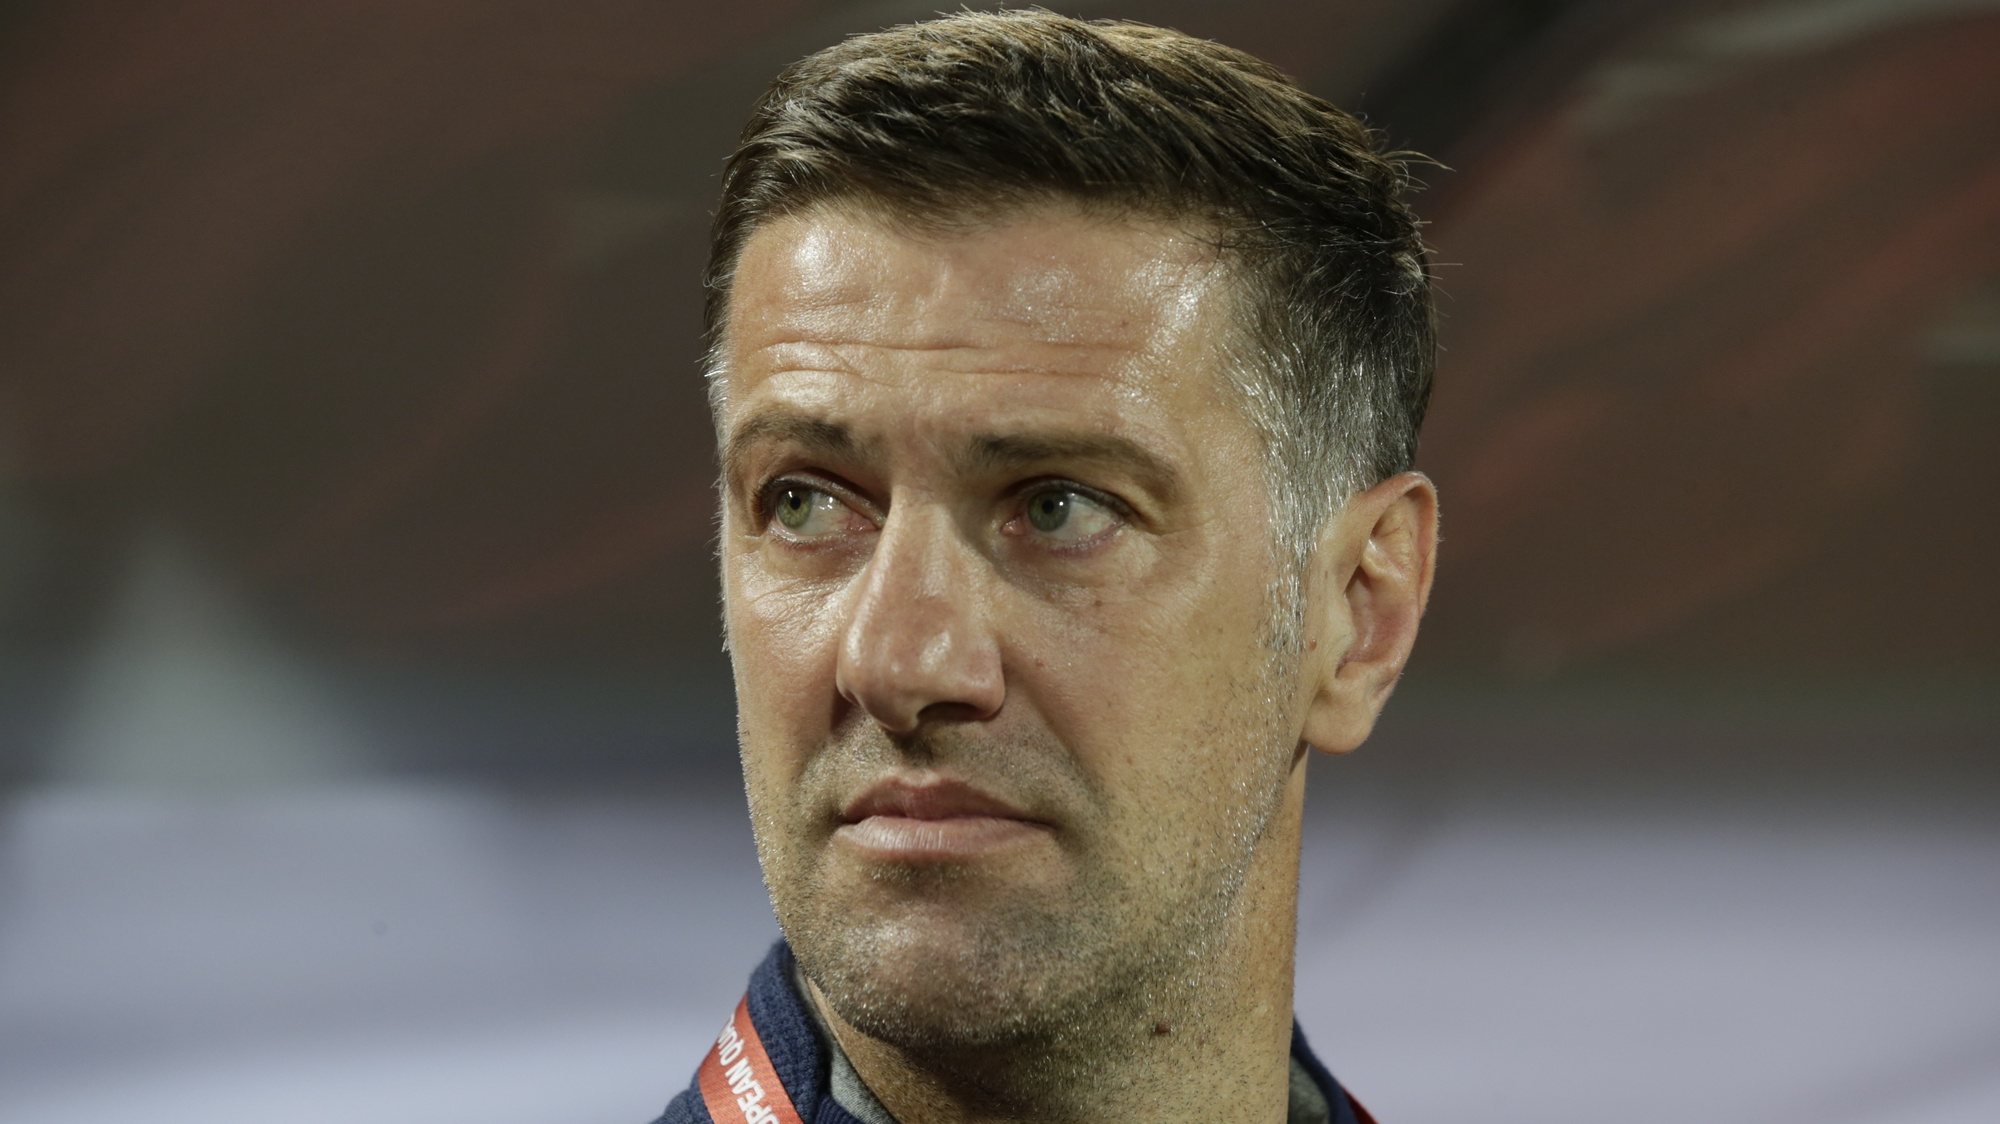 epa07639477 Serbia head coach Mladen Krstajic looks on before the UEFA EURO 2020, Group B qualifying soccer match between Serbia and Lithuania, in Belgrade, Serbia, 10 June 2019.  EPA/ANDREJ CUKIC